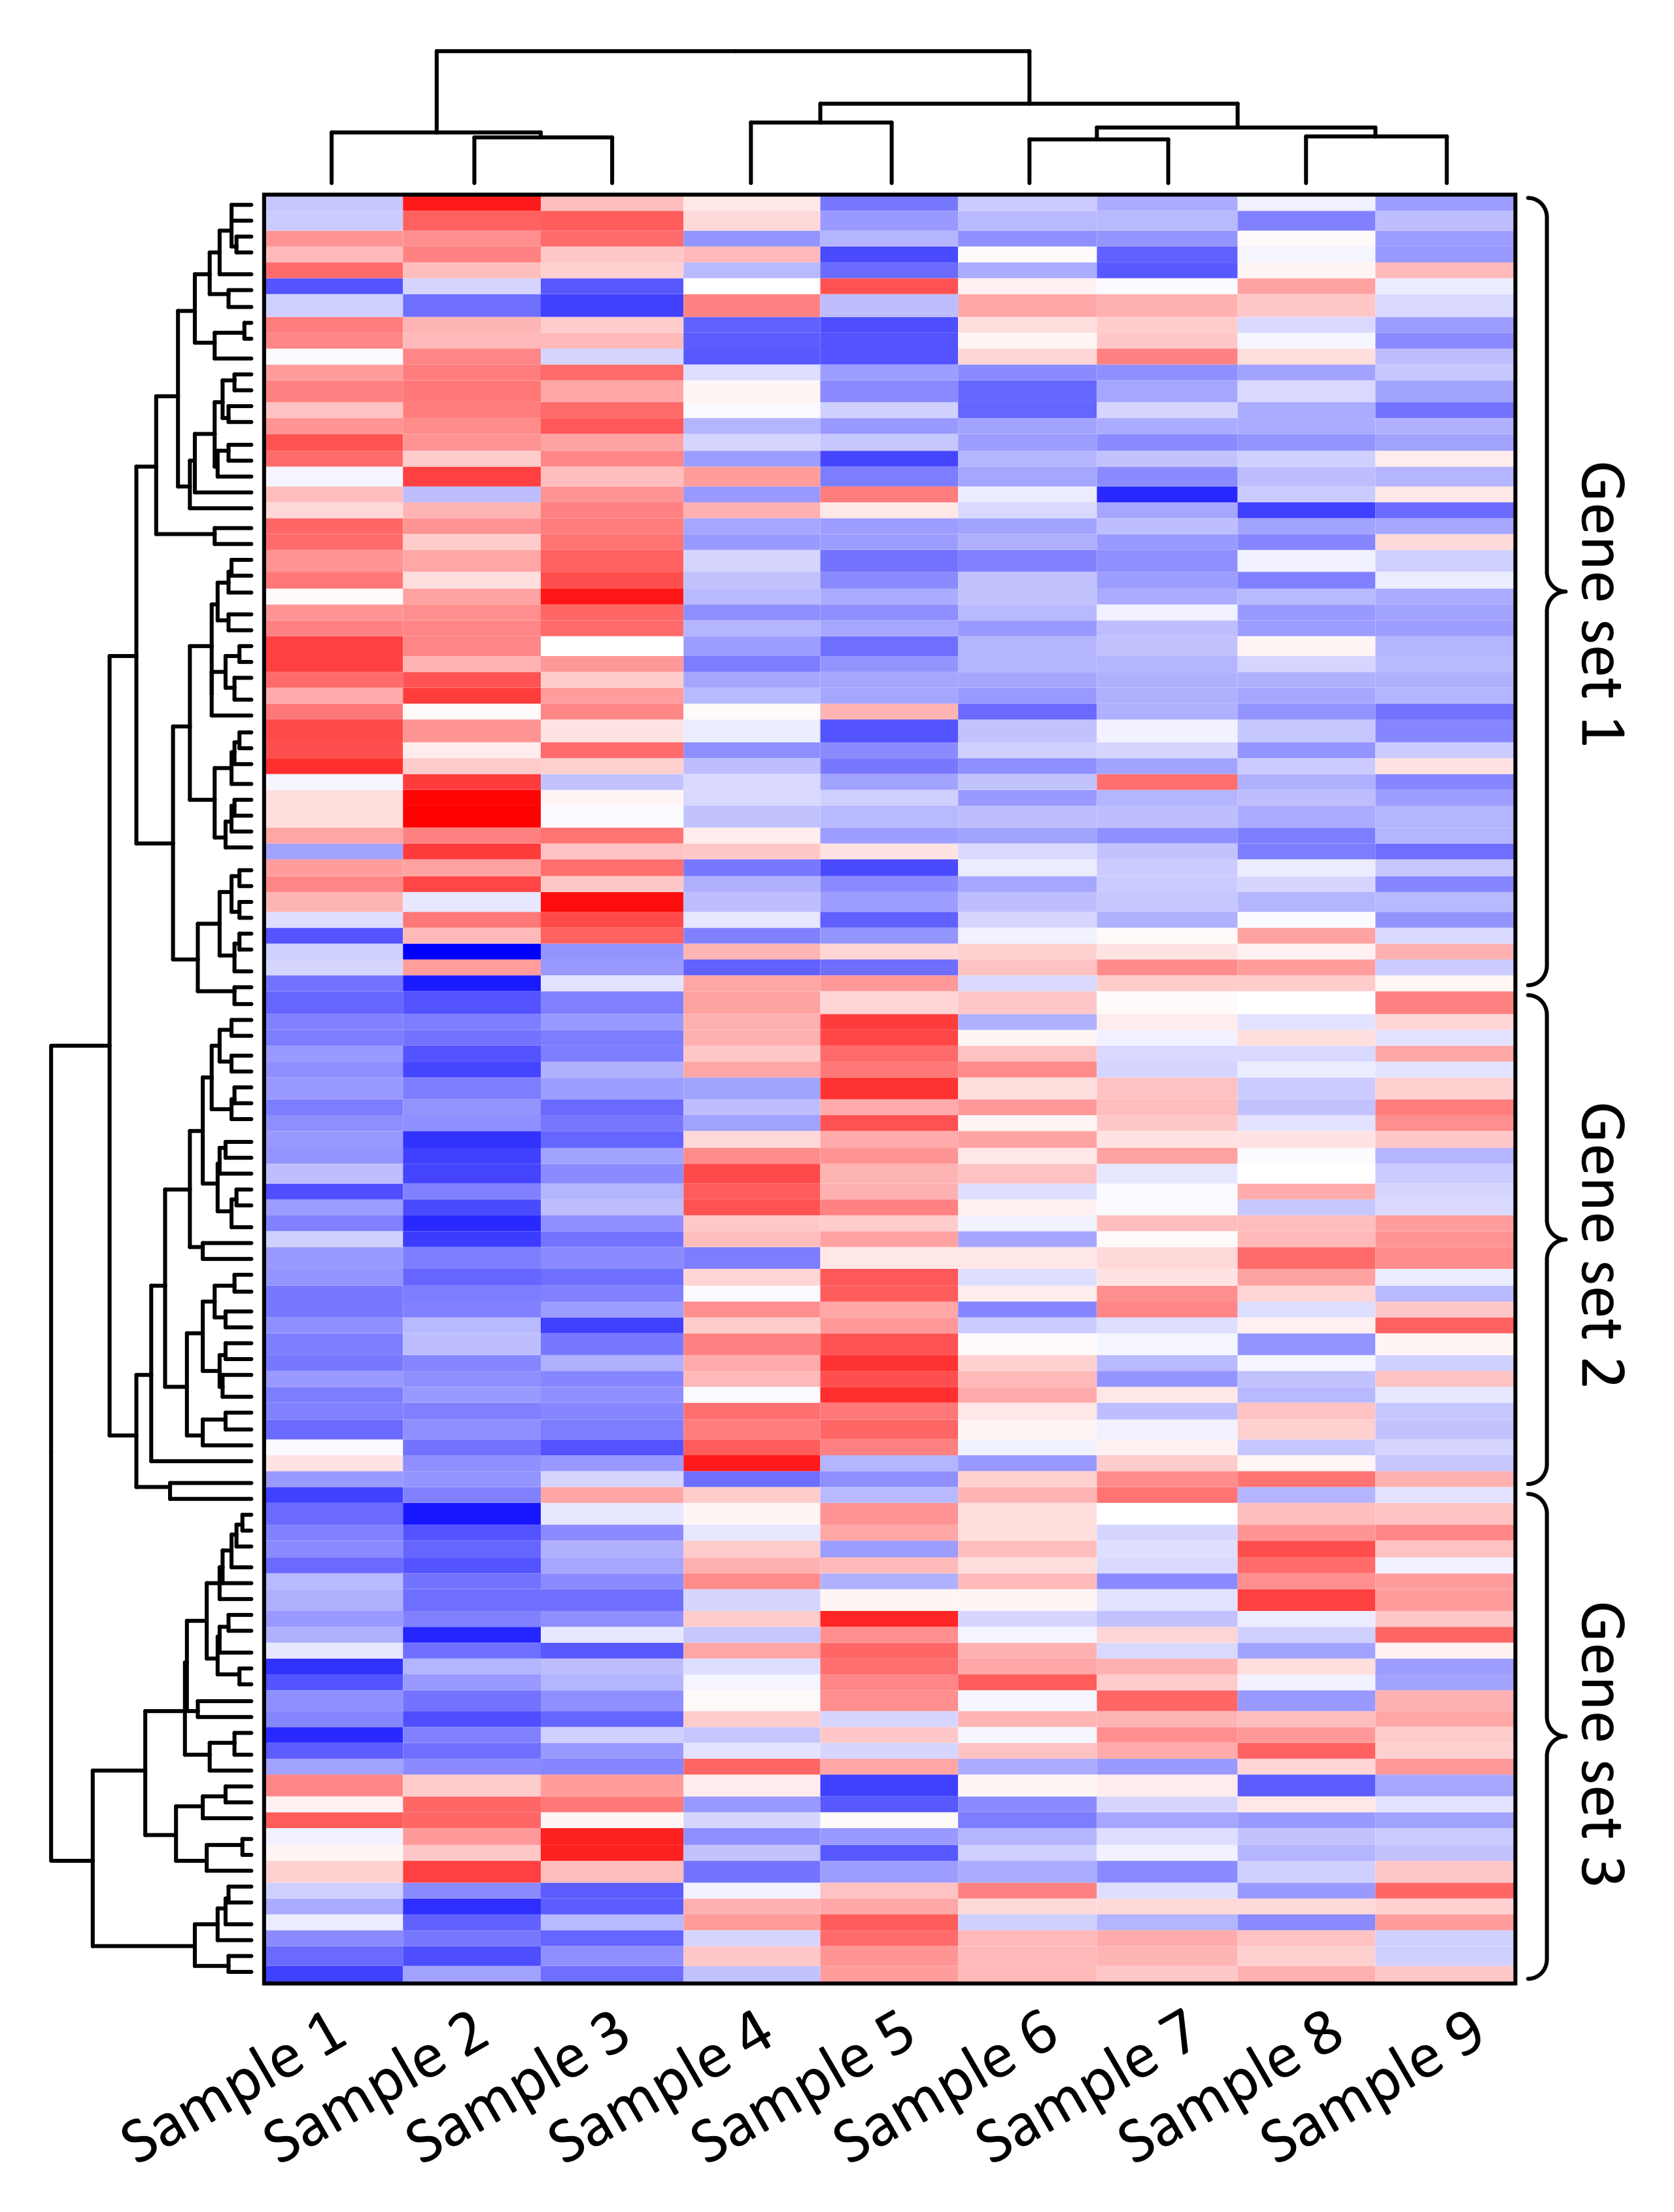 Heatmap identification of gene co-expression patterns across different samples